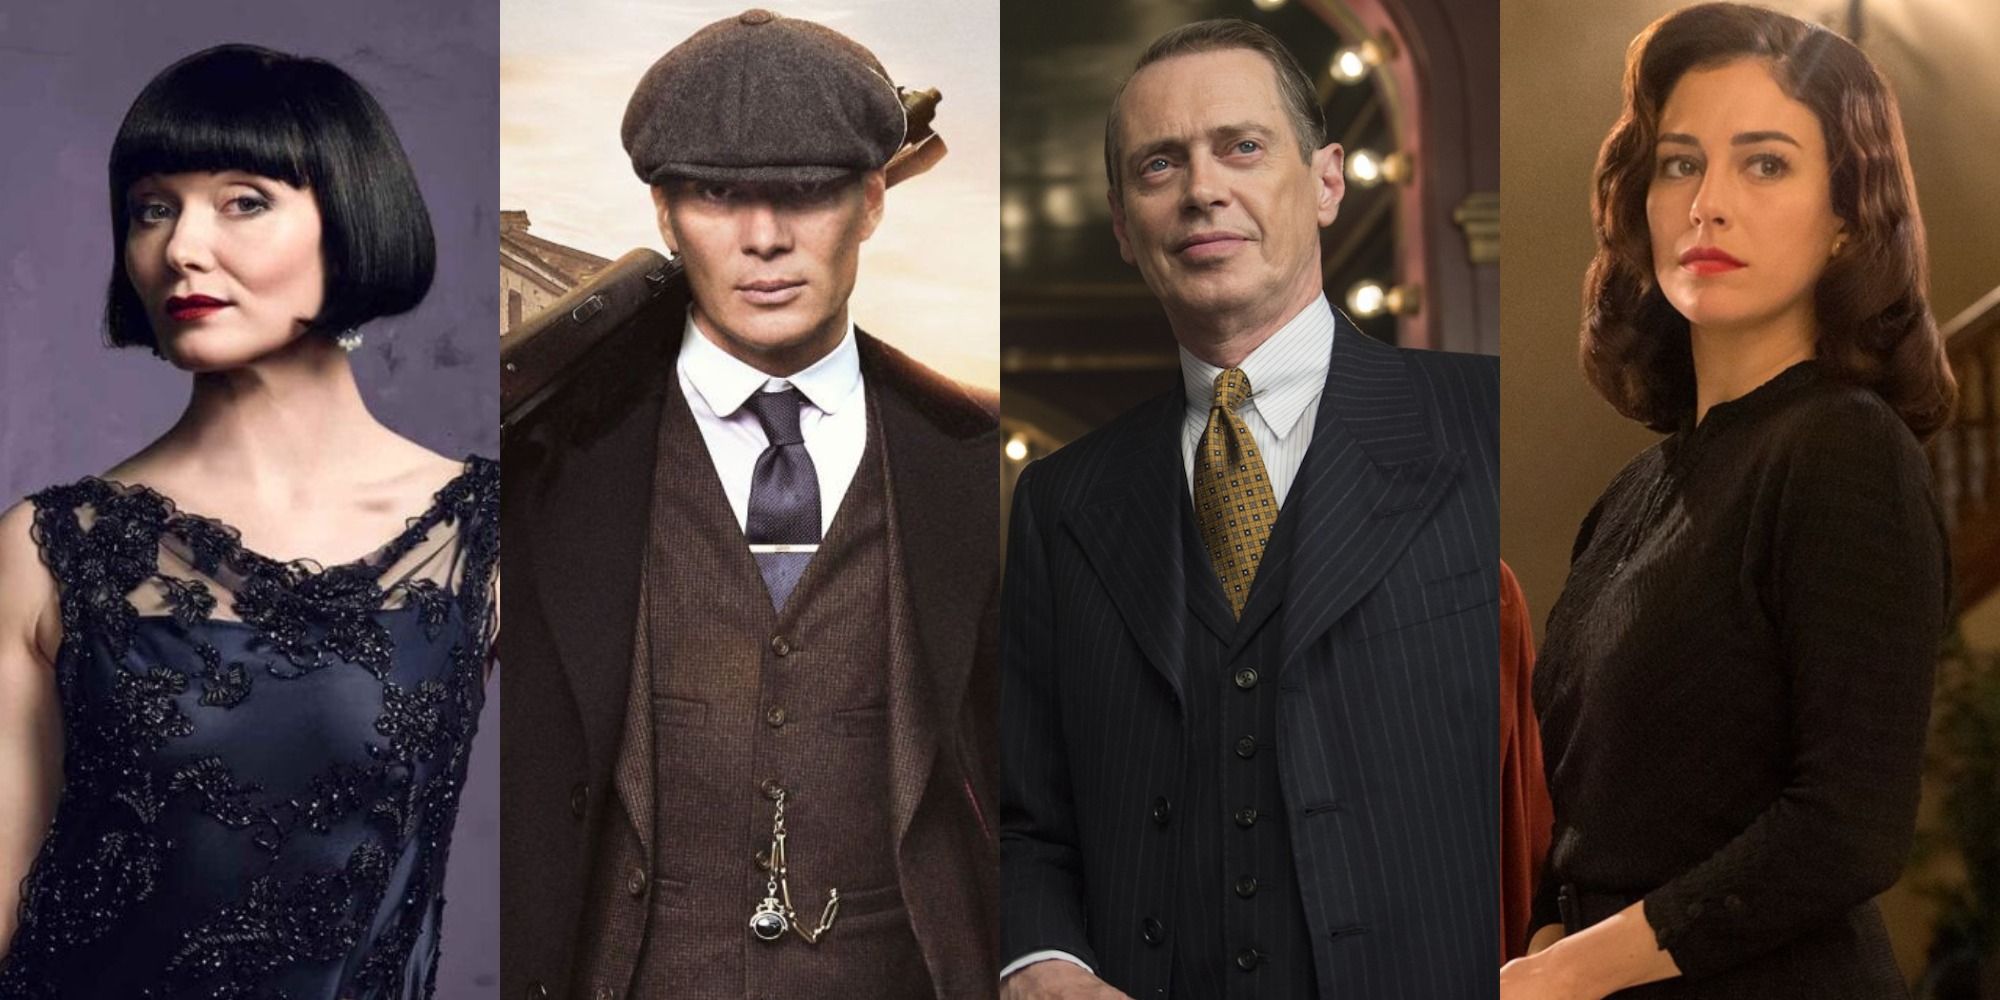 15 Best TV Period Dramas In The 1920s (According To IMDb)